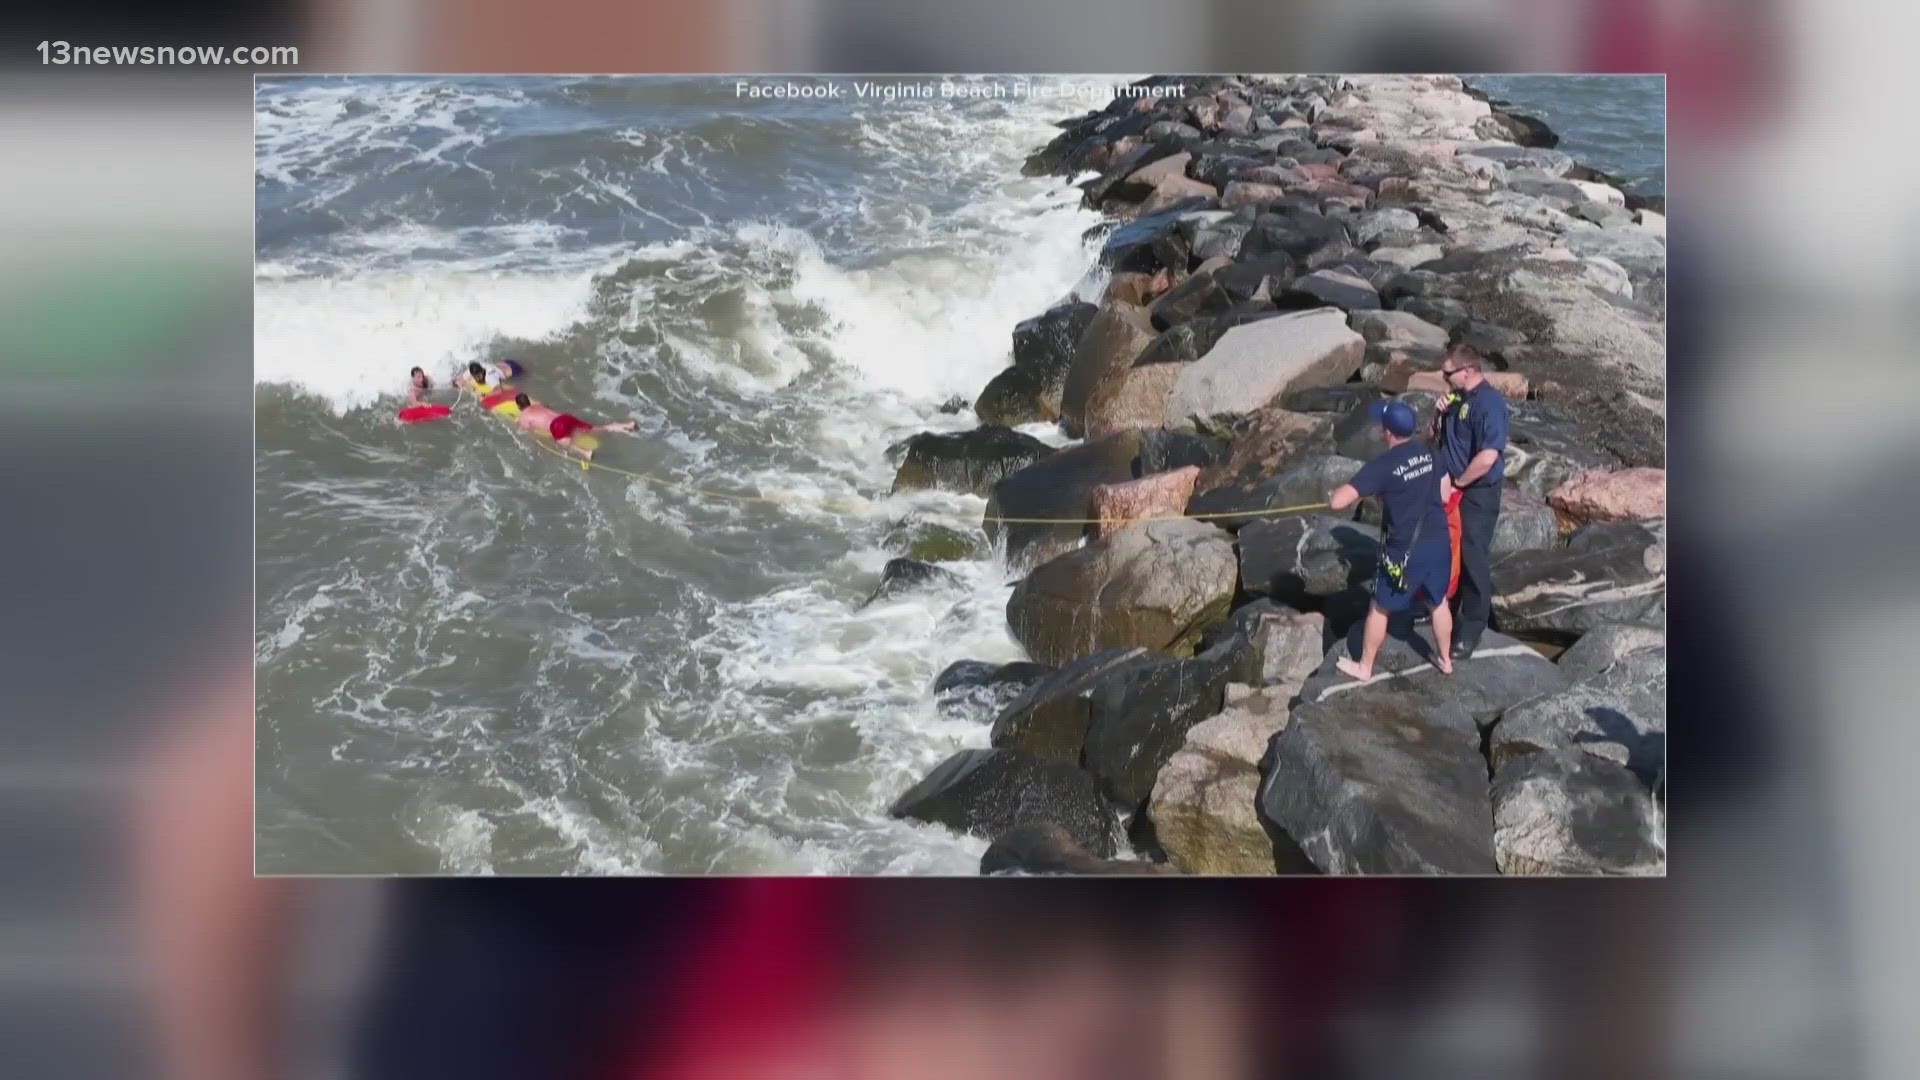 Only on 13News Now, the family rescued by Virginia Beach Fire Department and lifeguards share the moments their son got swept into the ocean.